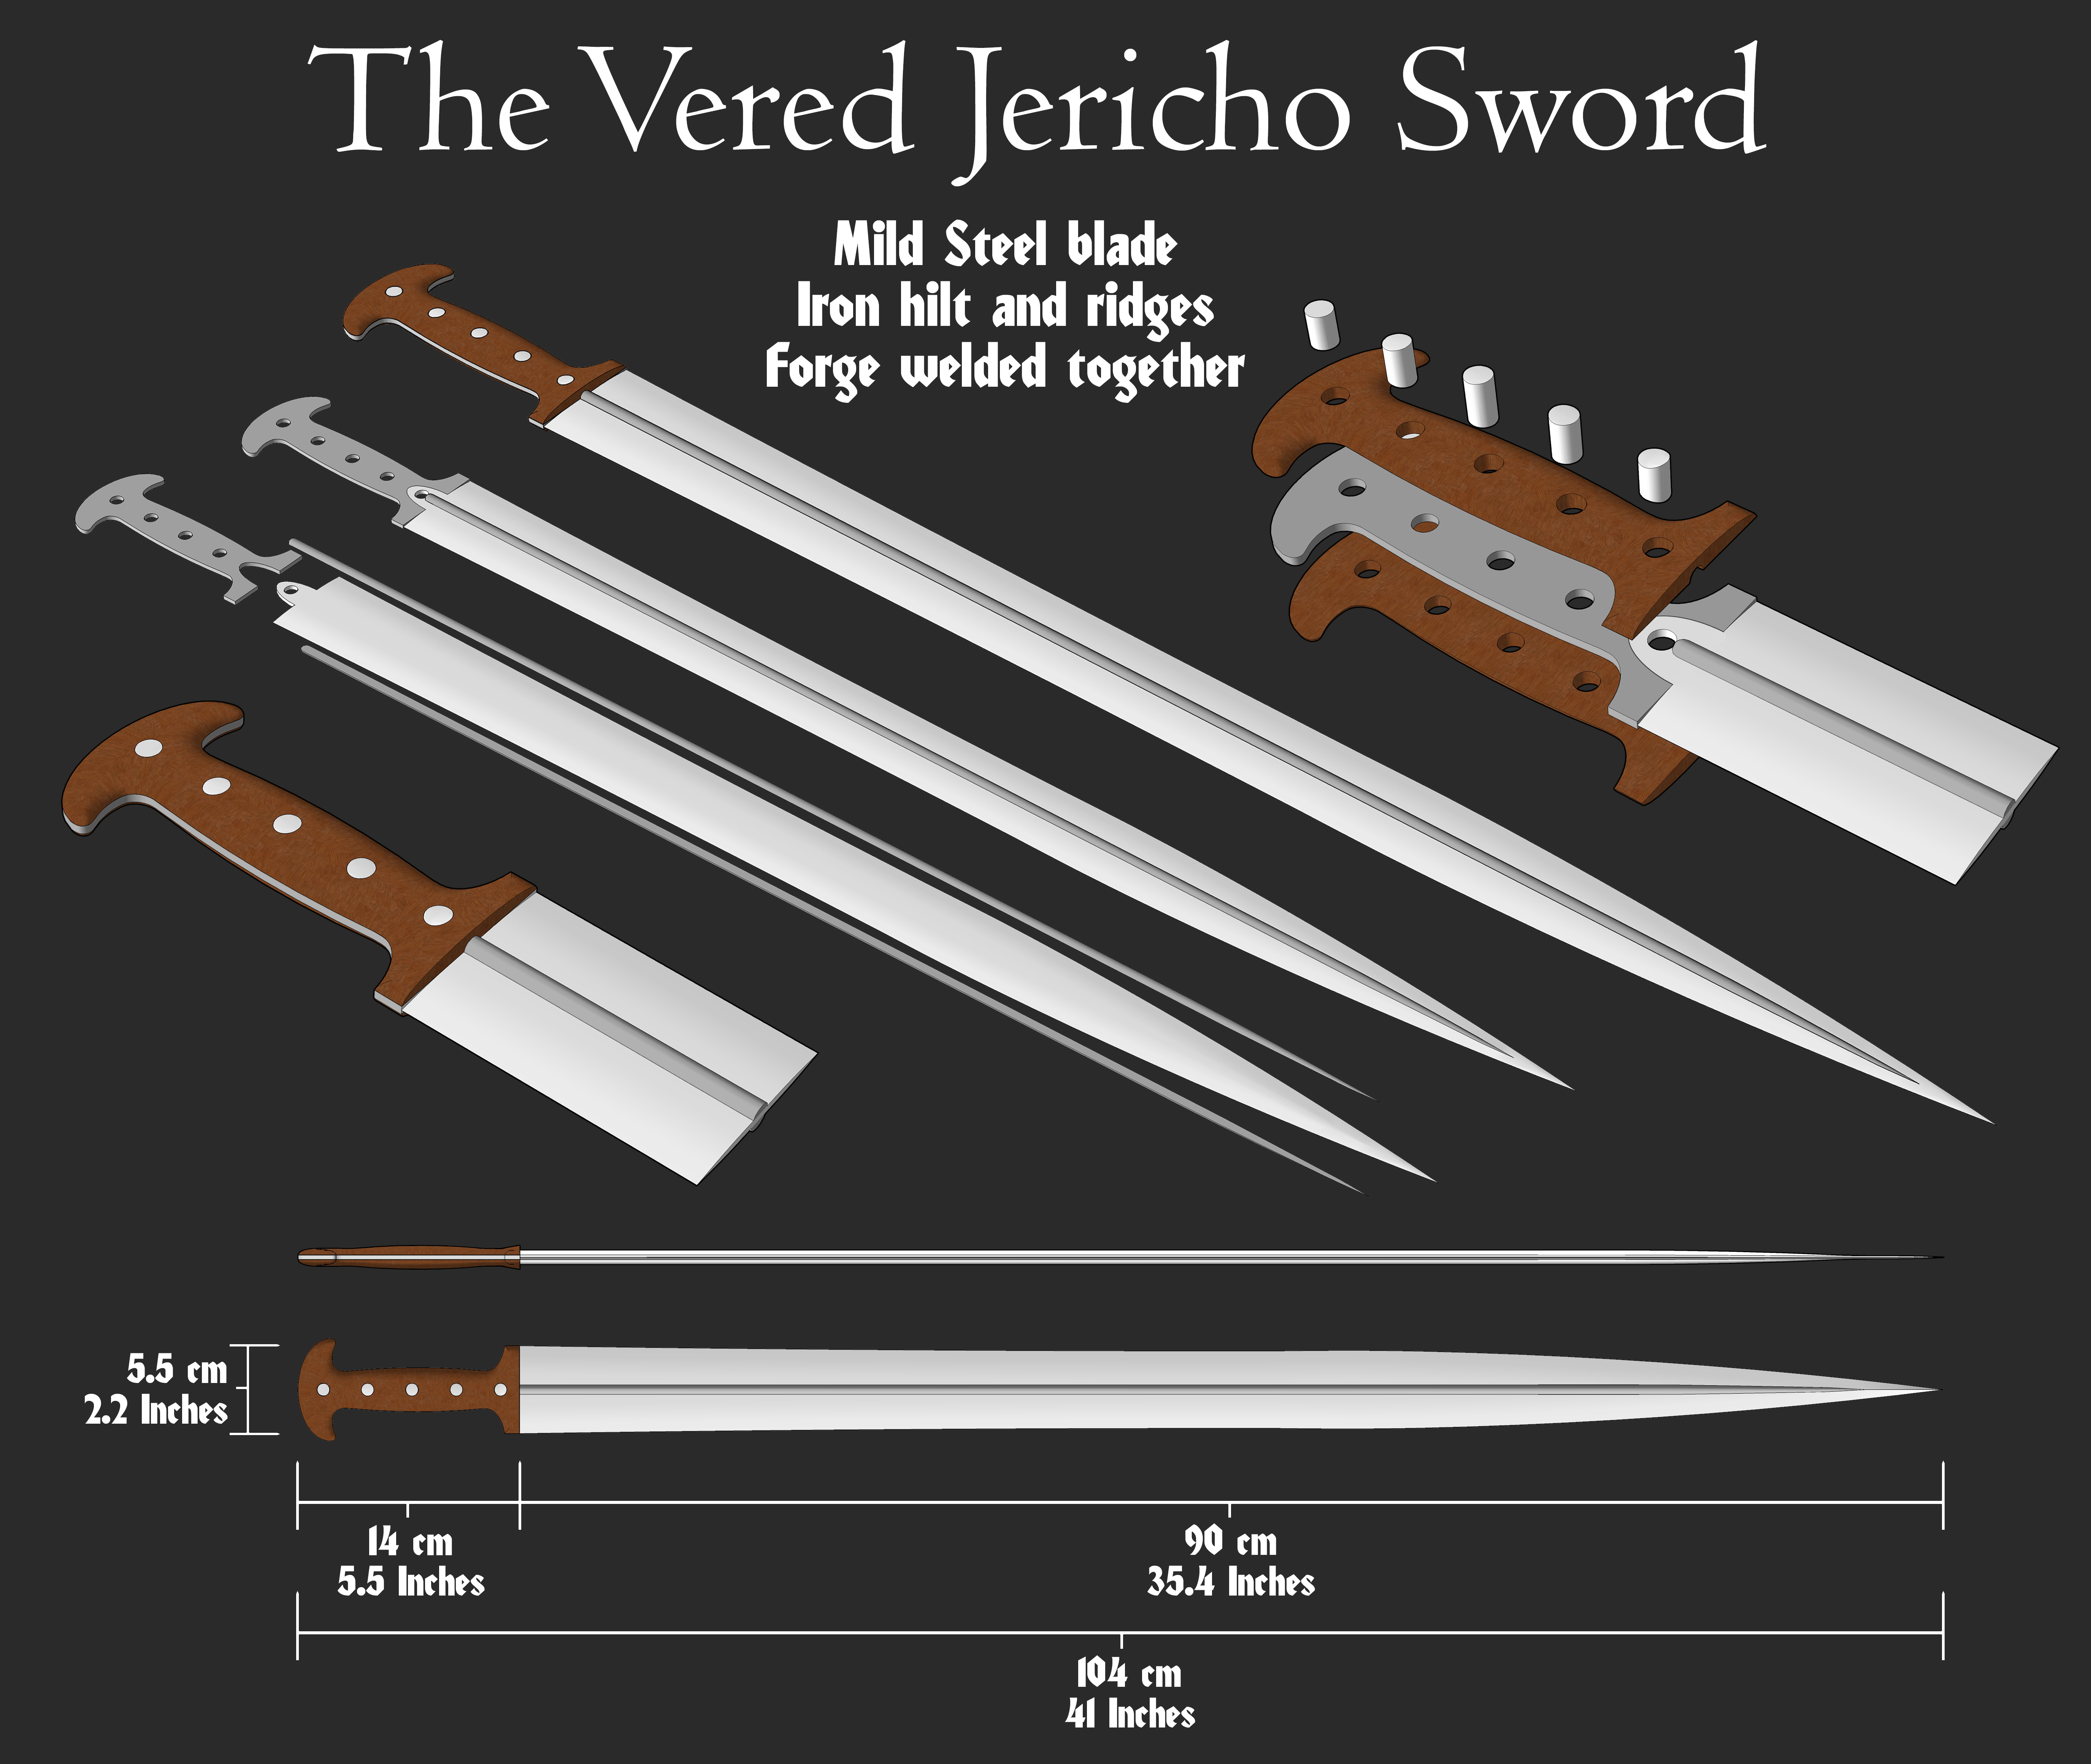 Vered Jericho Sword of Ancient Israel, 600BC STEEL